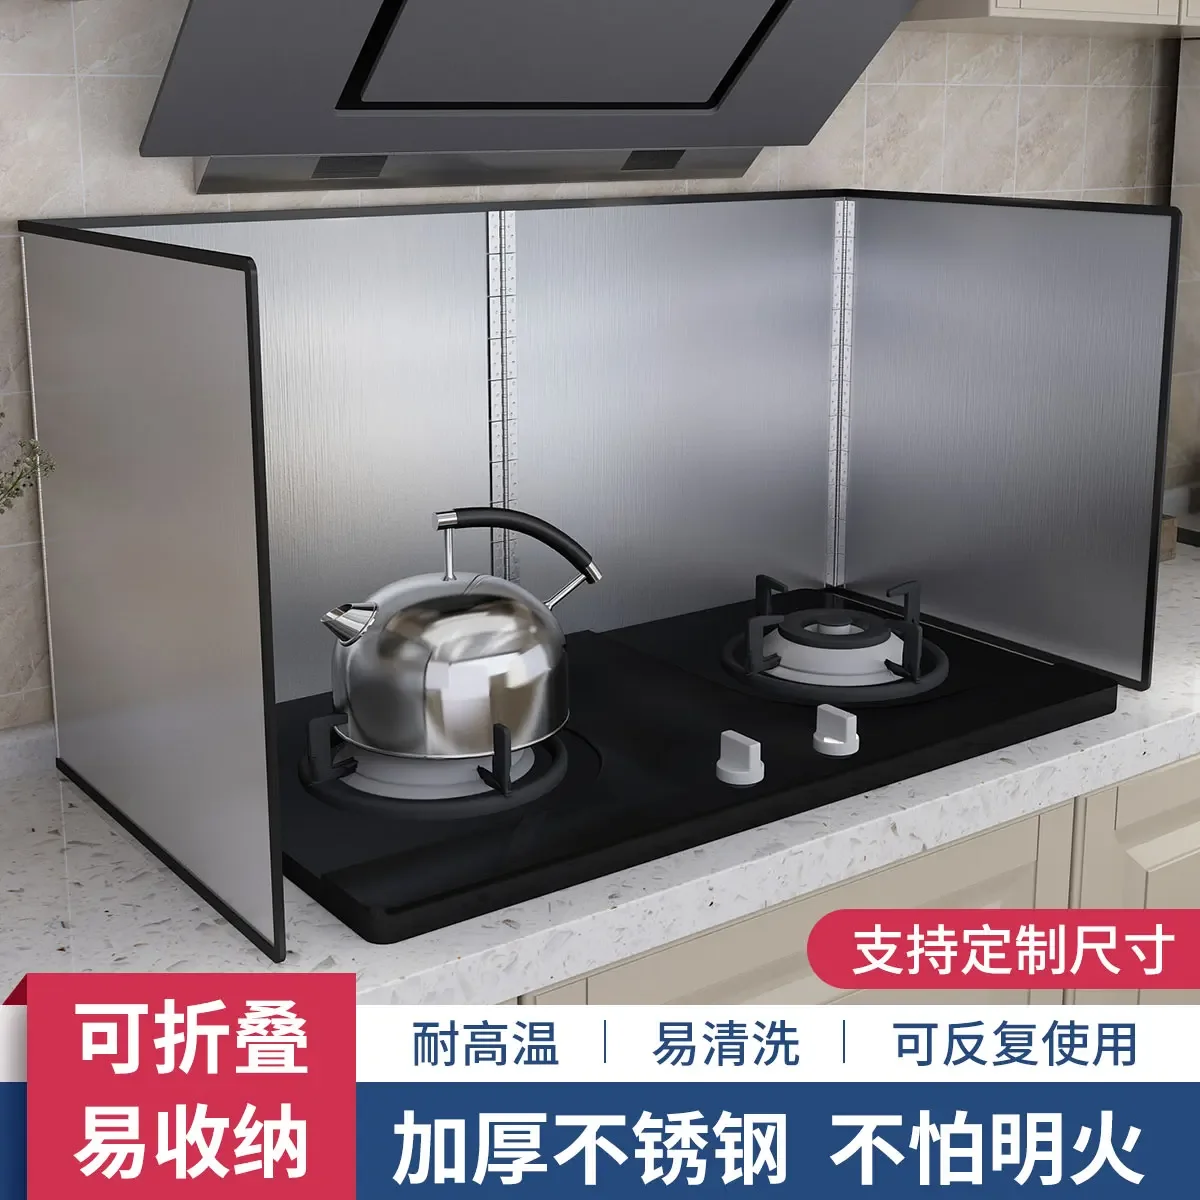 Stainless Steel Kitchen Oil Baffle Plate Gas Cooker Cooking Splash Hood Insulated High Temperature Resistant Oil Baffle